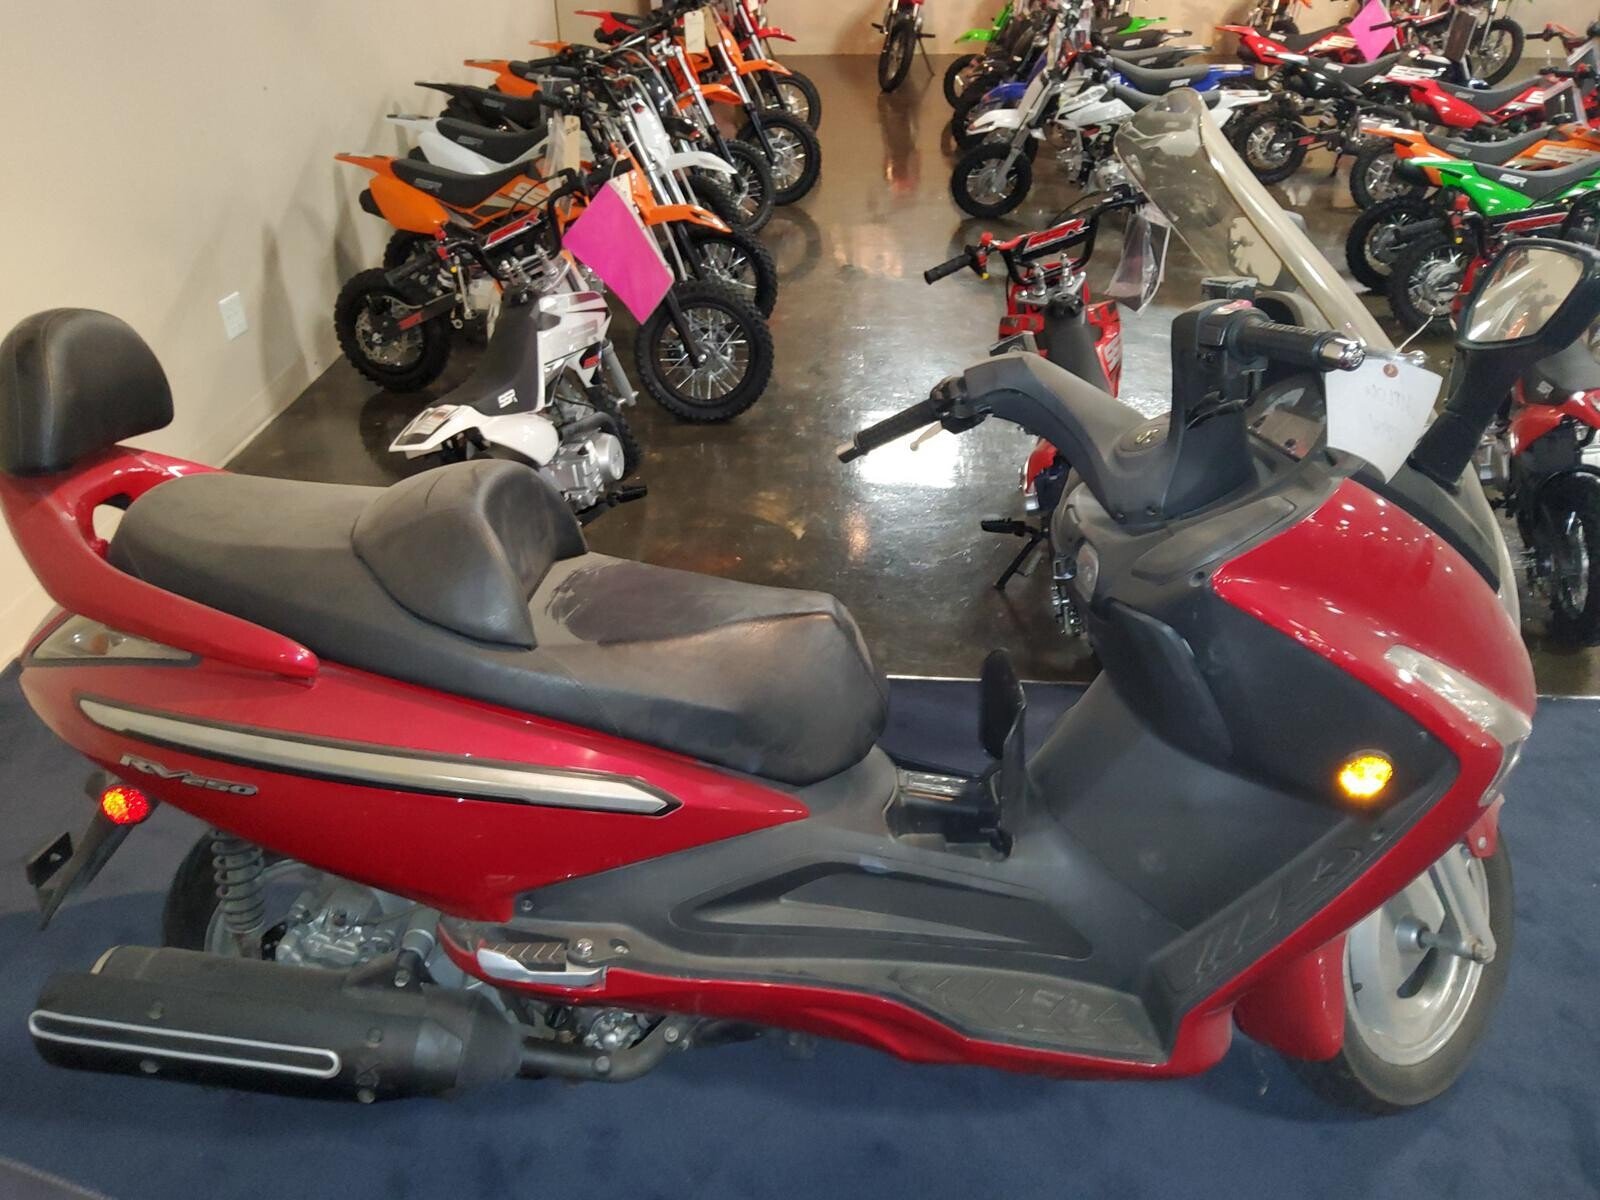 SYM RV 250 Motorcycles for Sale - Motorcycles on Autotrader